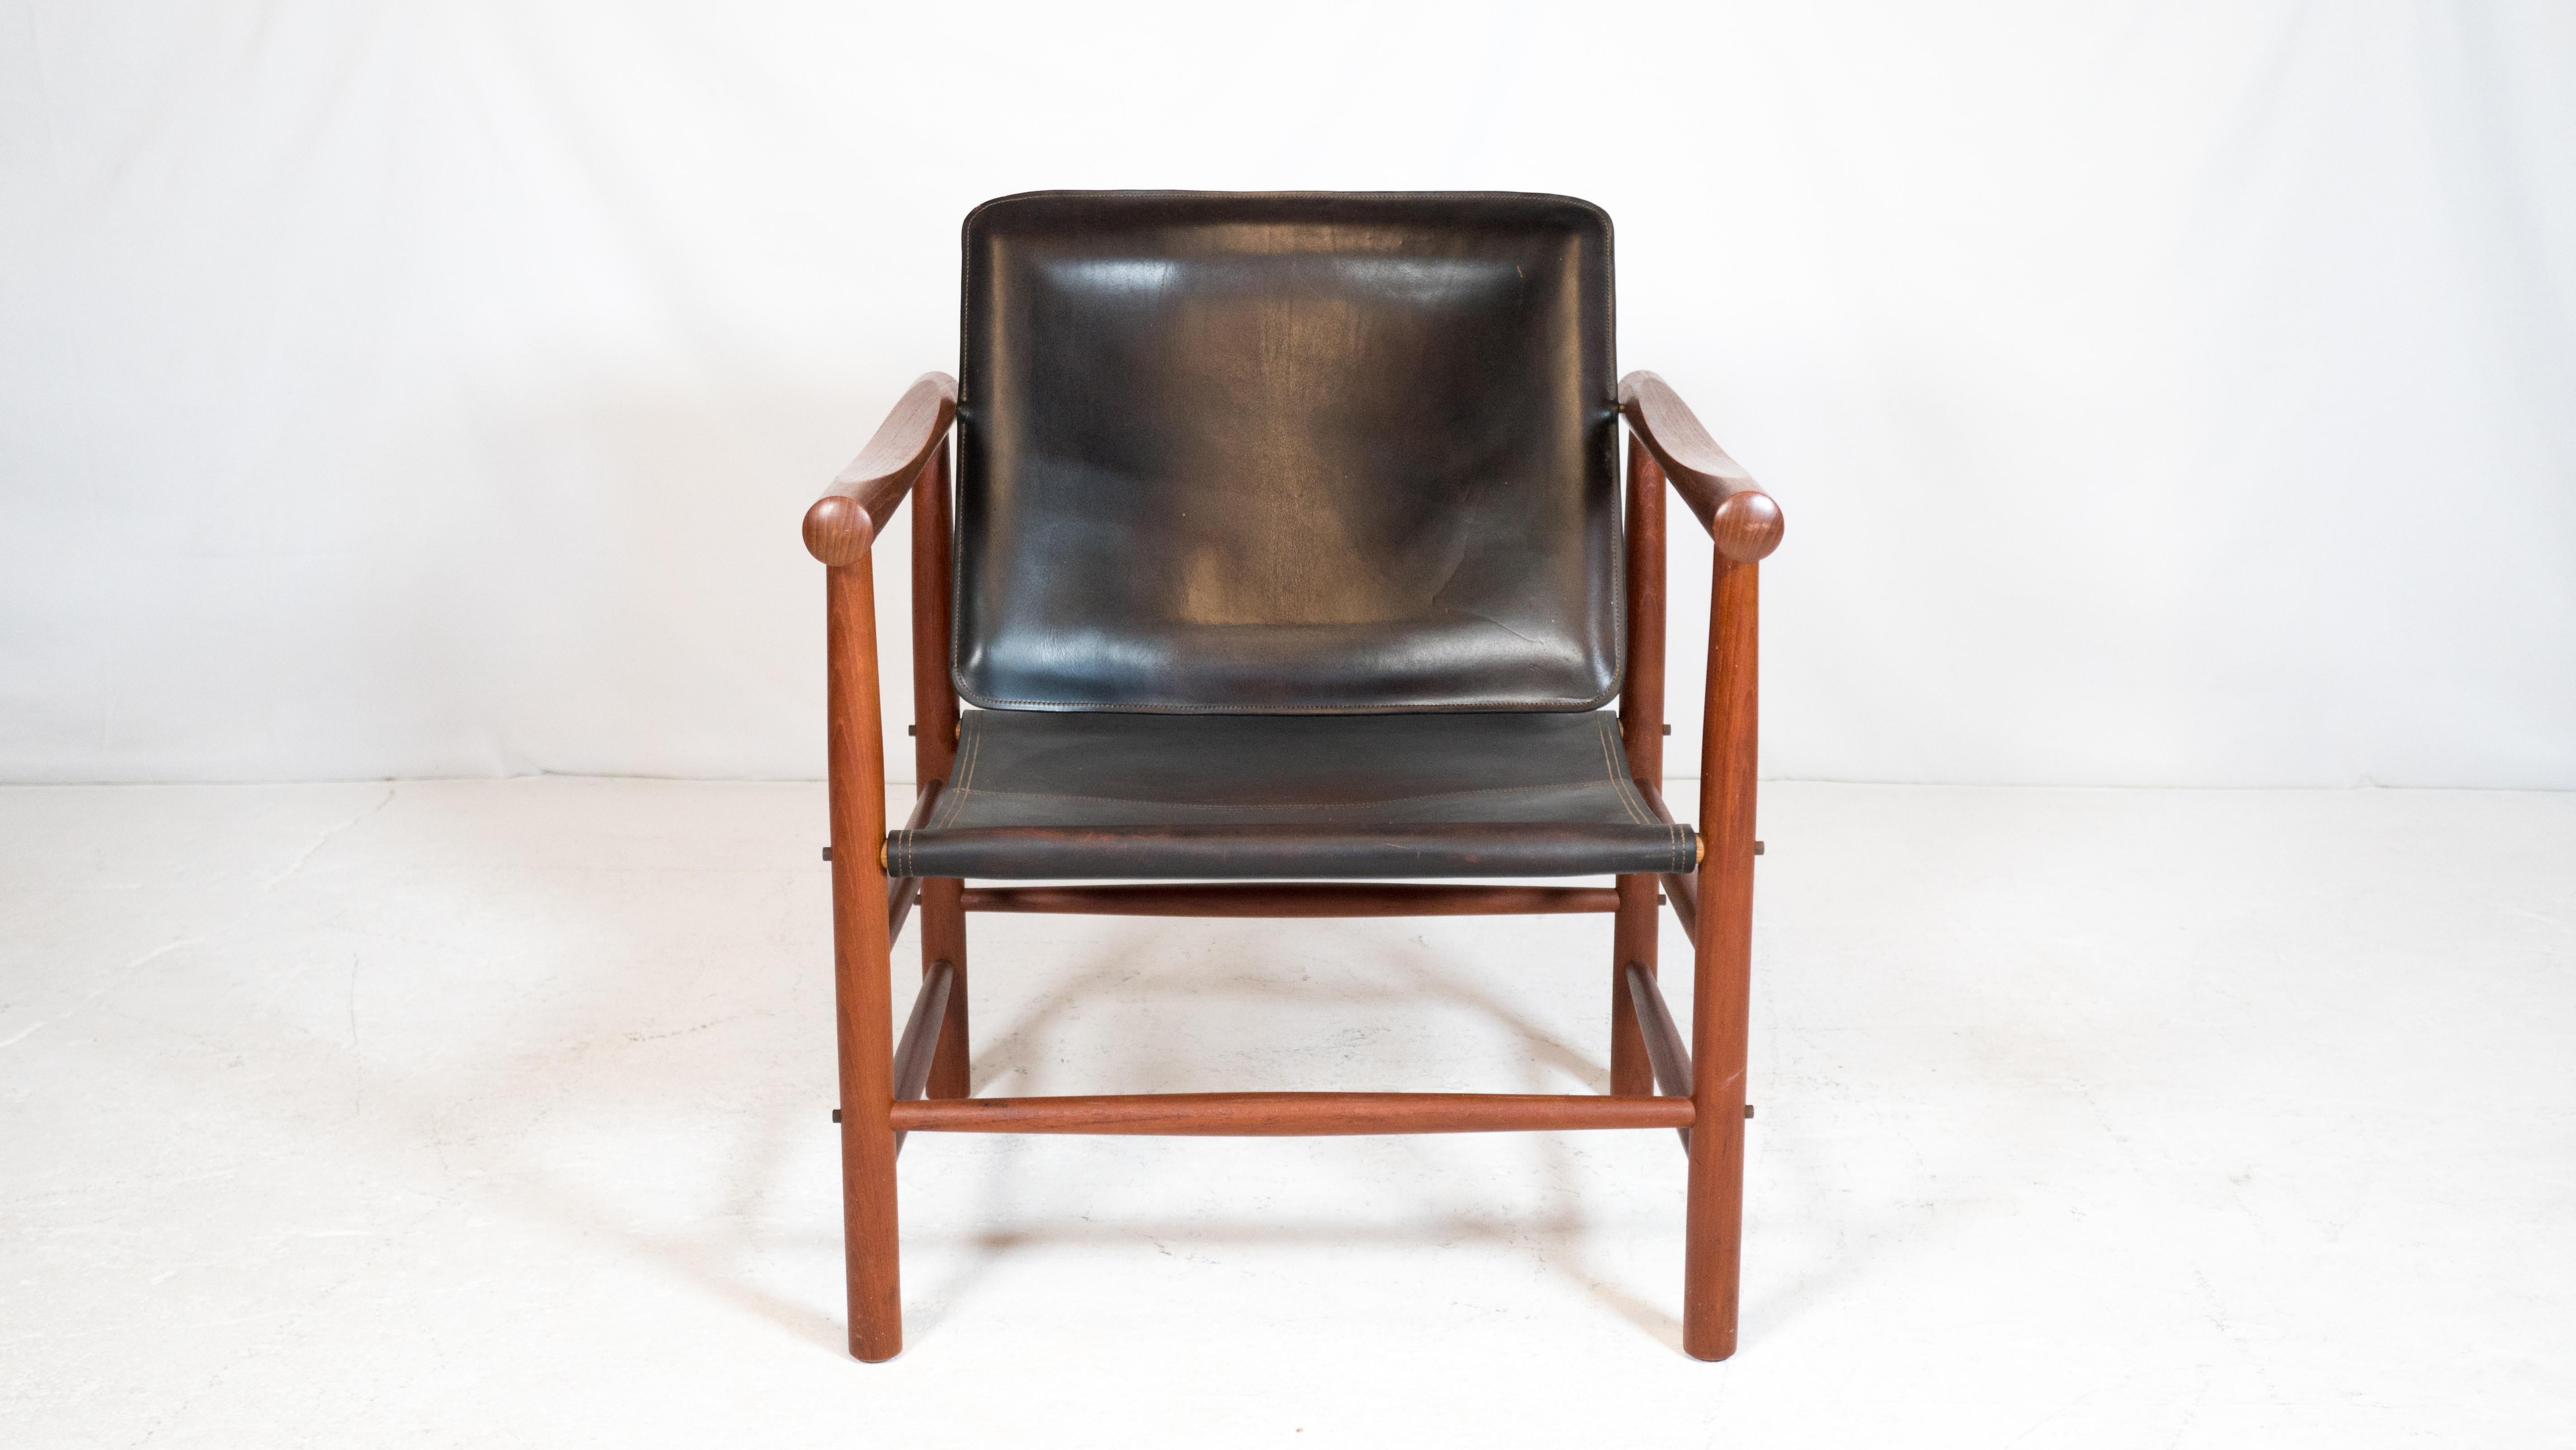 'Model 506' chair designed by Kai Lyngfeldt Larsen for Søborg Møbler, circa 1960s. Original black saddle leather with light patina showing the natural brown undertone of the leather. Solid teak construction, exposed stitching details, brass hardware